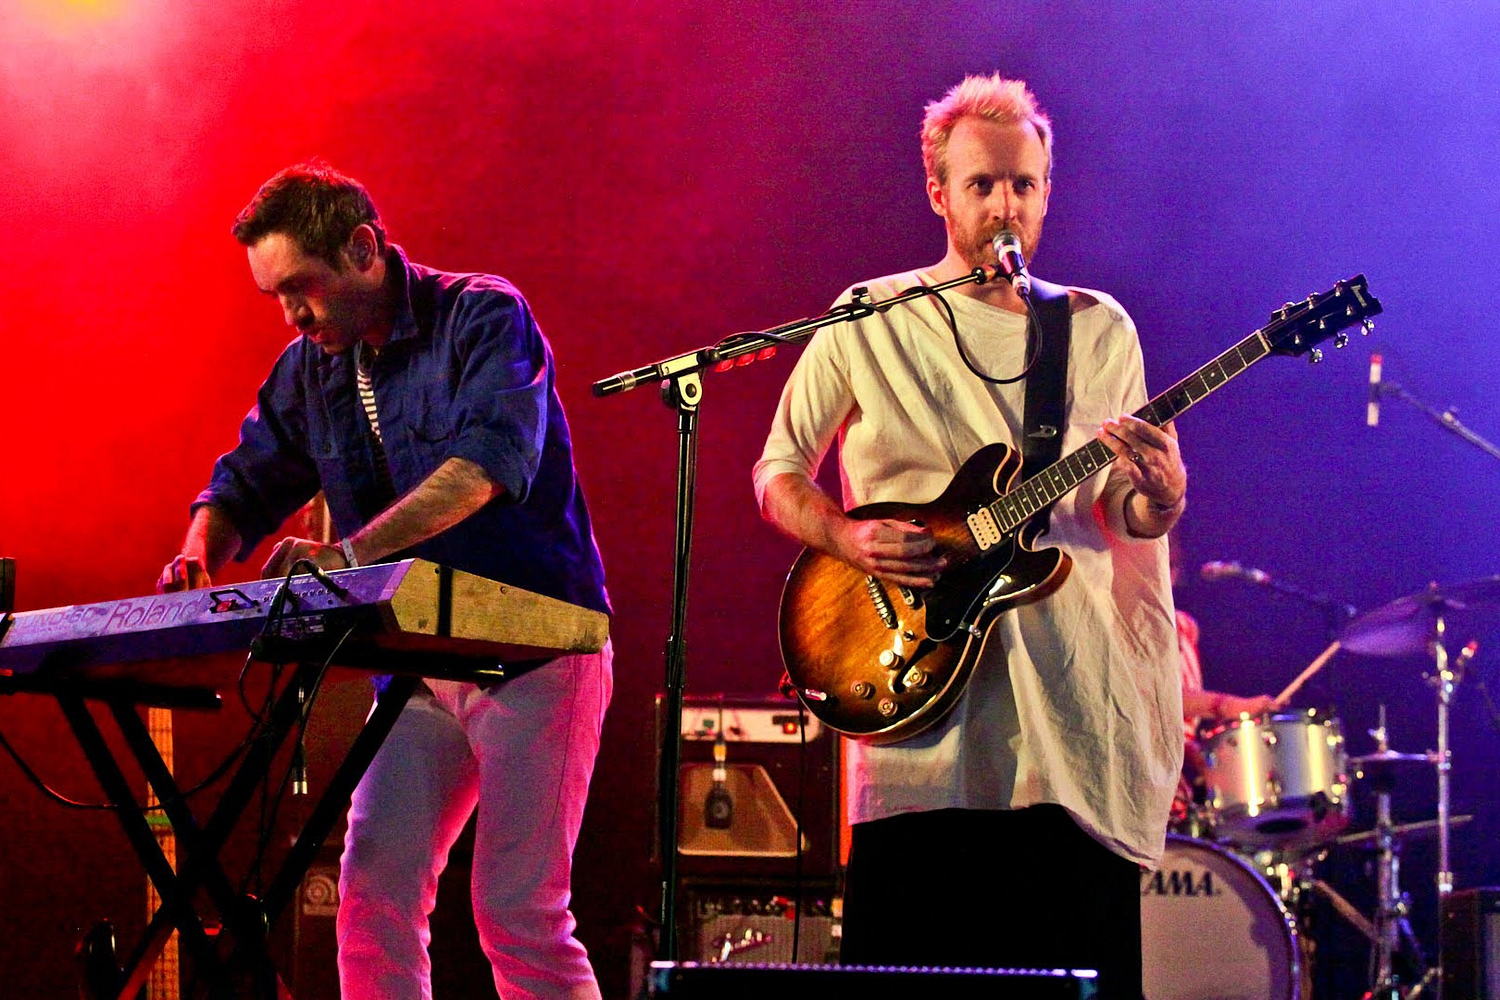 See Hot Chip’s take on ‘Dancing in the Dark’ from T in the Park